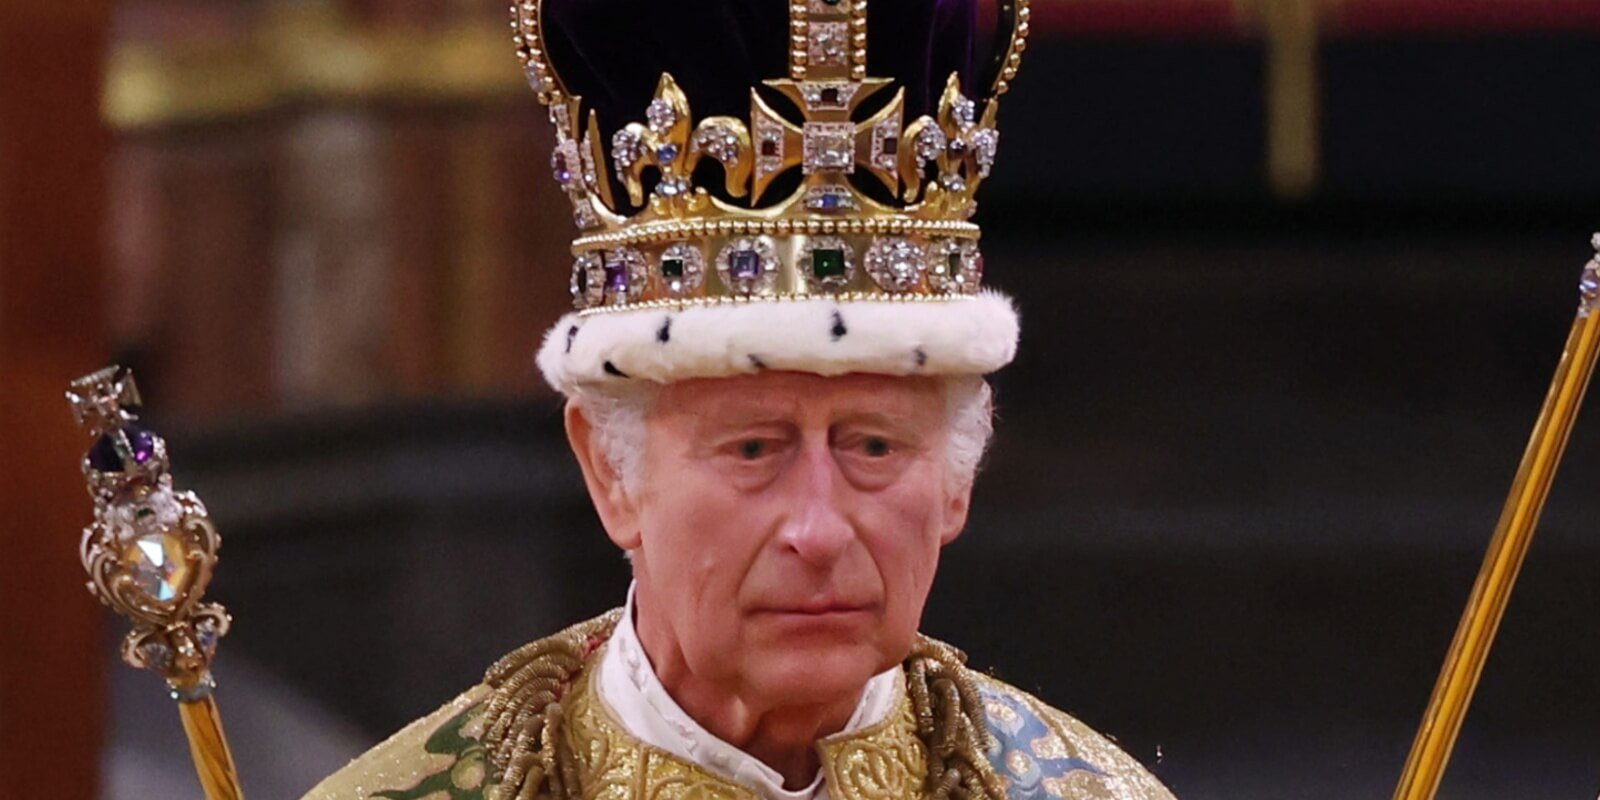 King Charles at his coronation ceremony which demonstrated the royal family's immense wealth.